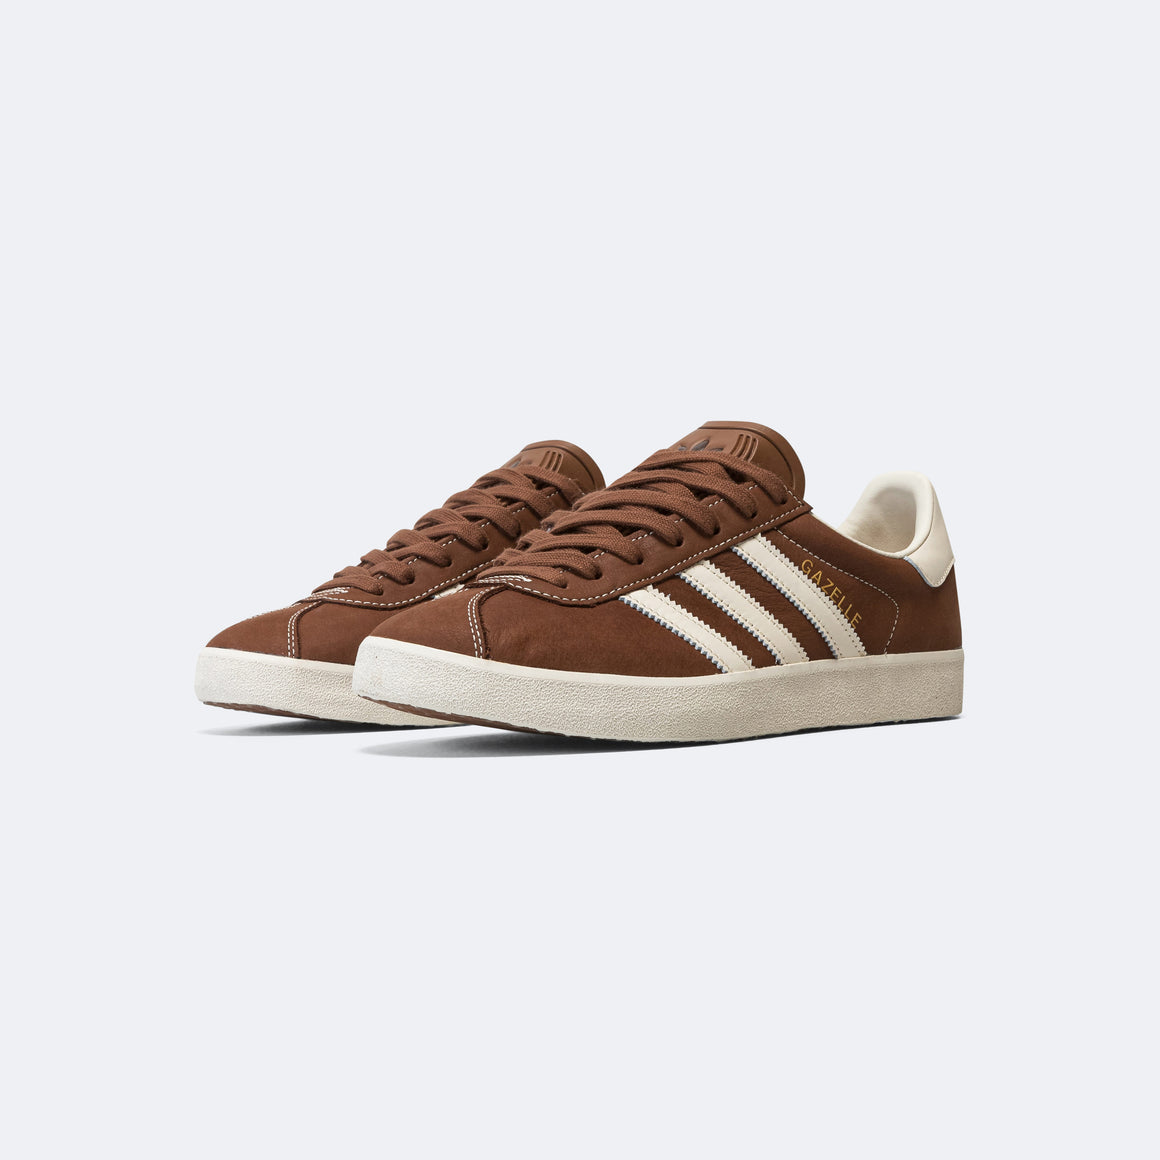 adidas - Gazelle 85 - Preloved Brown/Core White-Wonder White - UP THERE